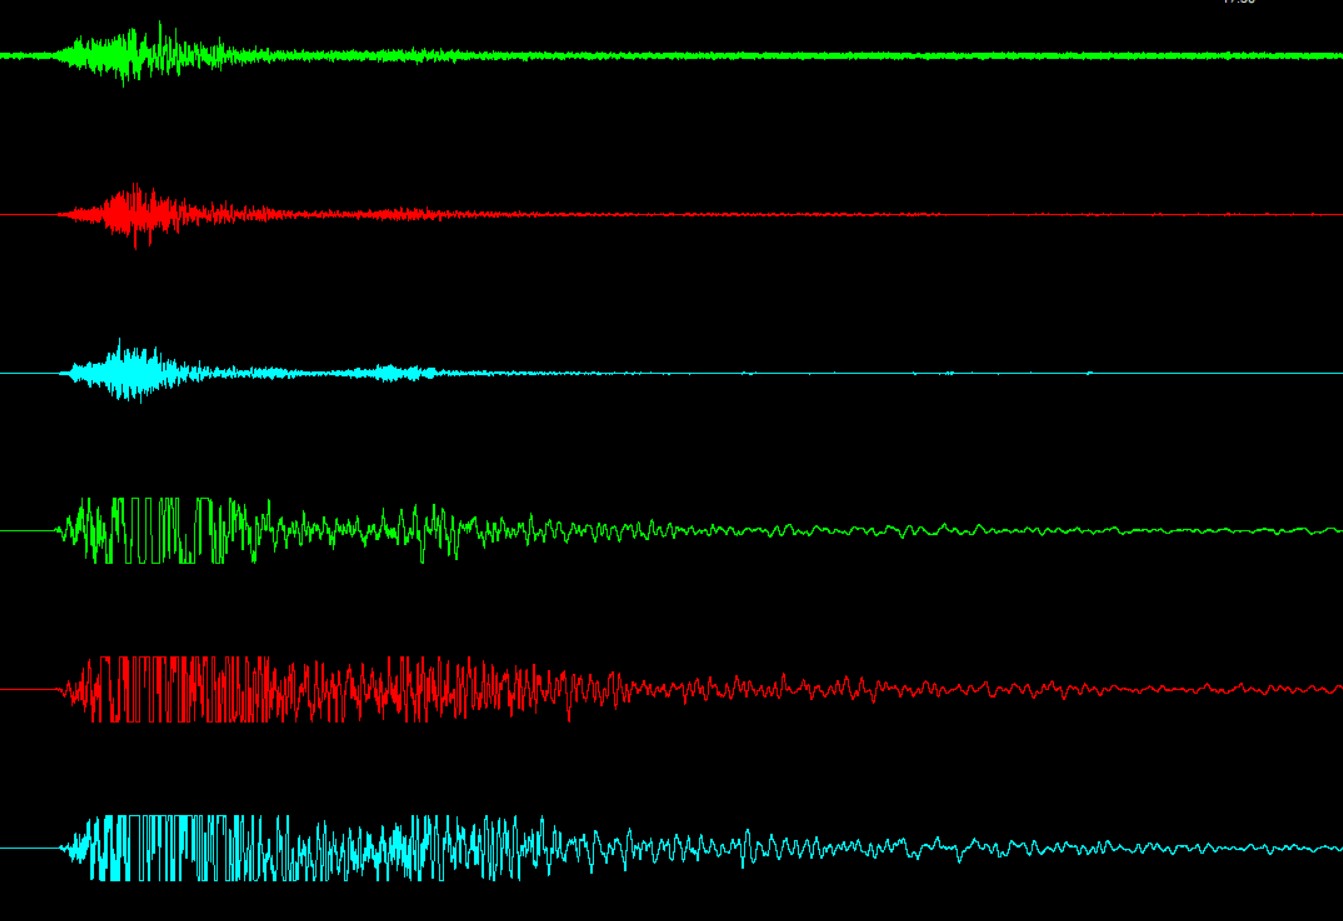 Fig 2: Close up of hybrid borehole waveform data from the Magnitude 6.6 event